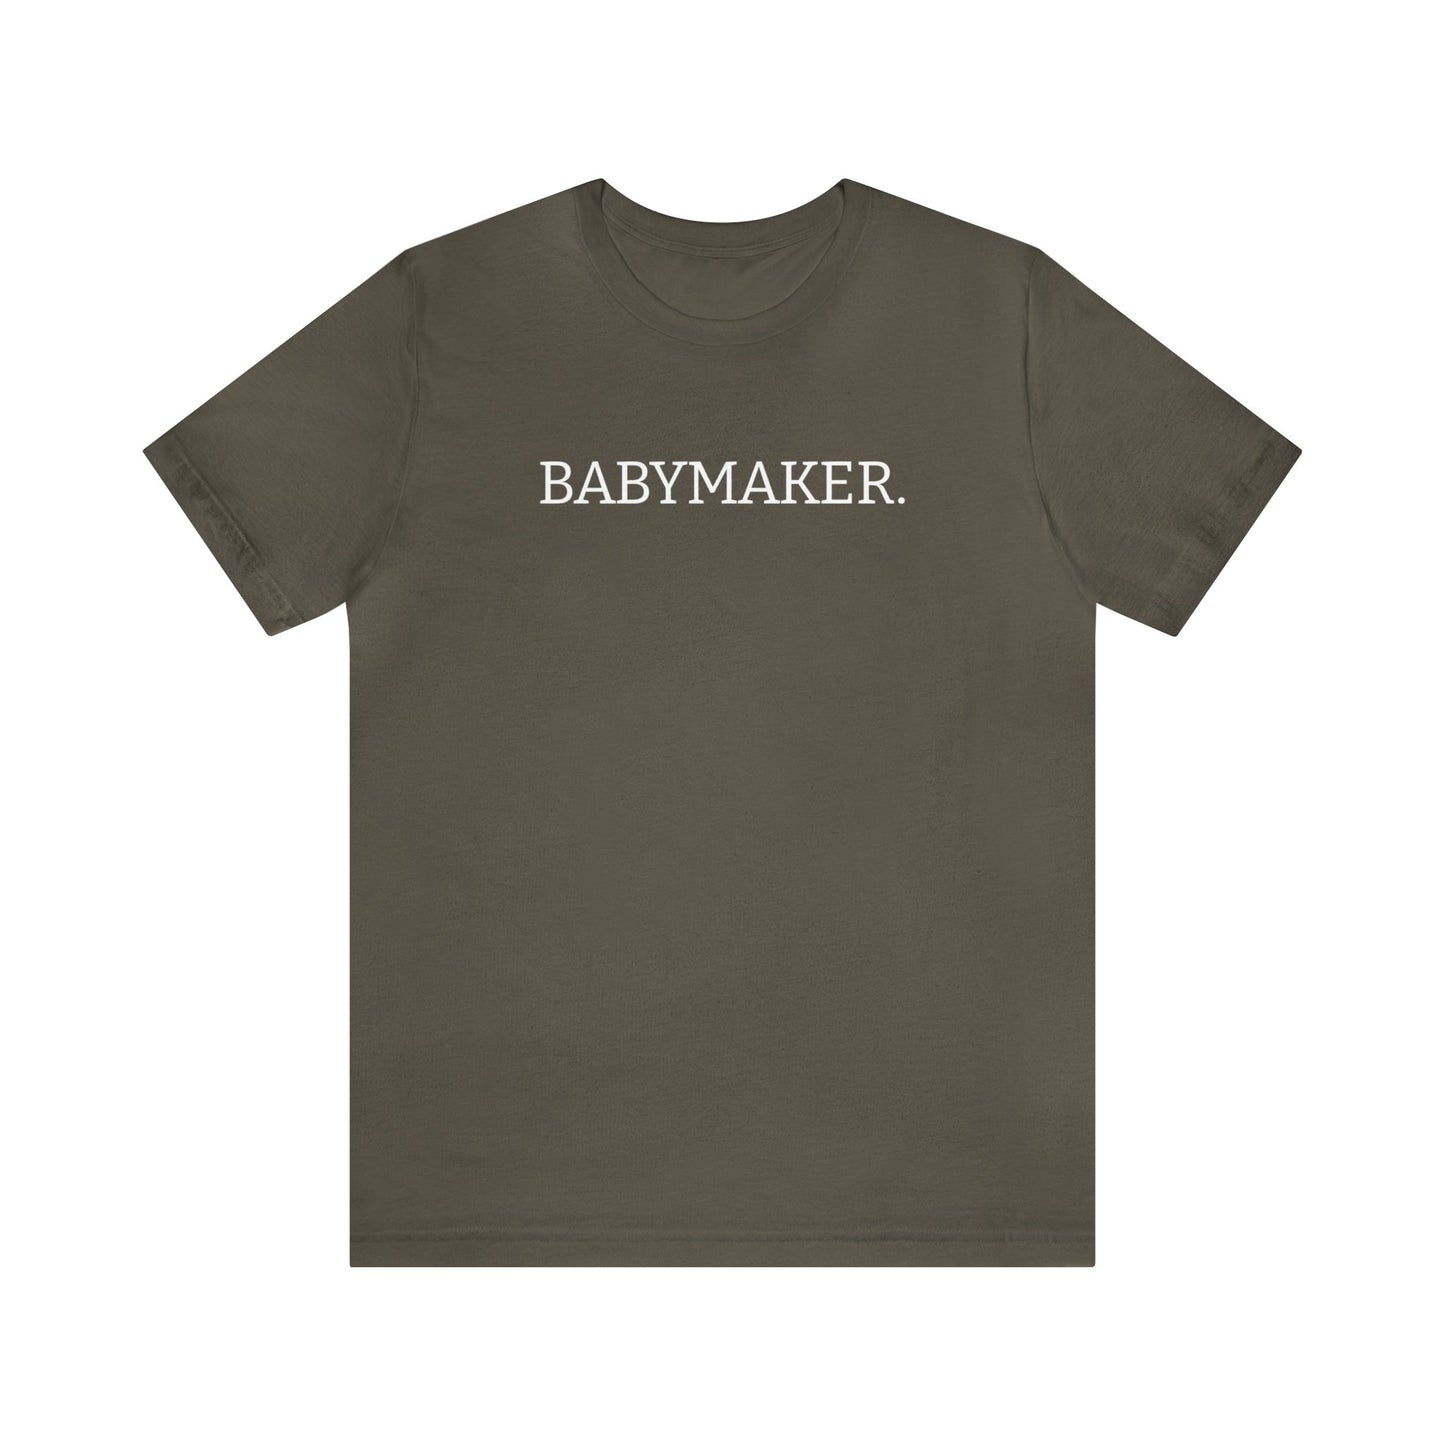 BABYMAKER Unisex T-shirt in Army